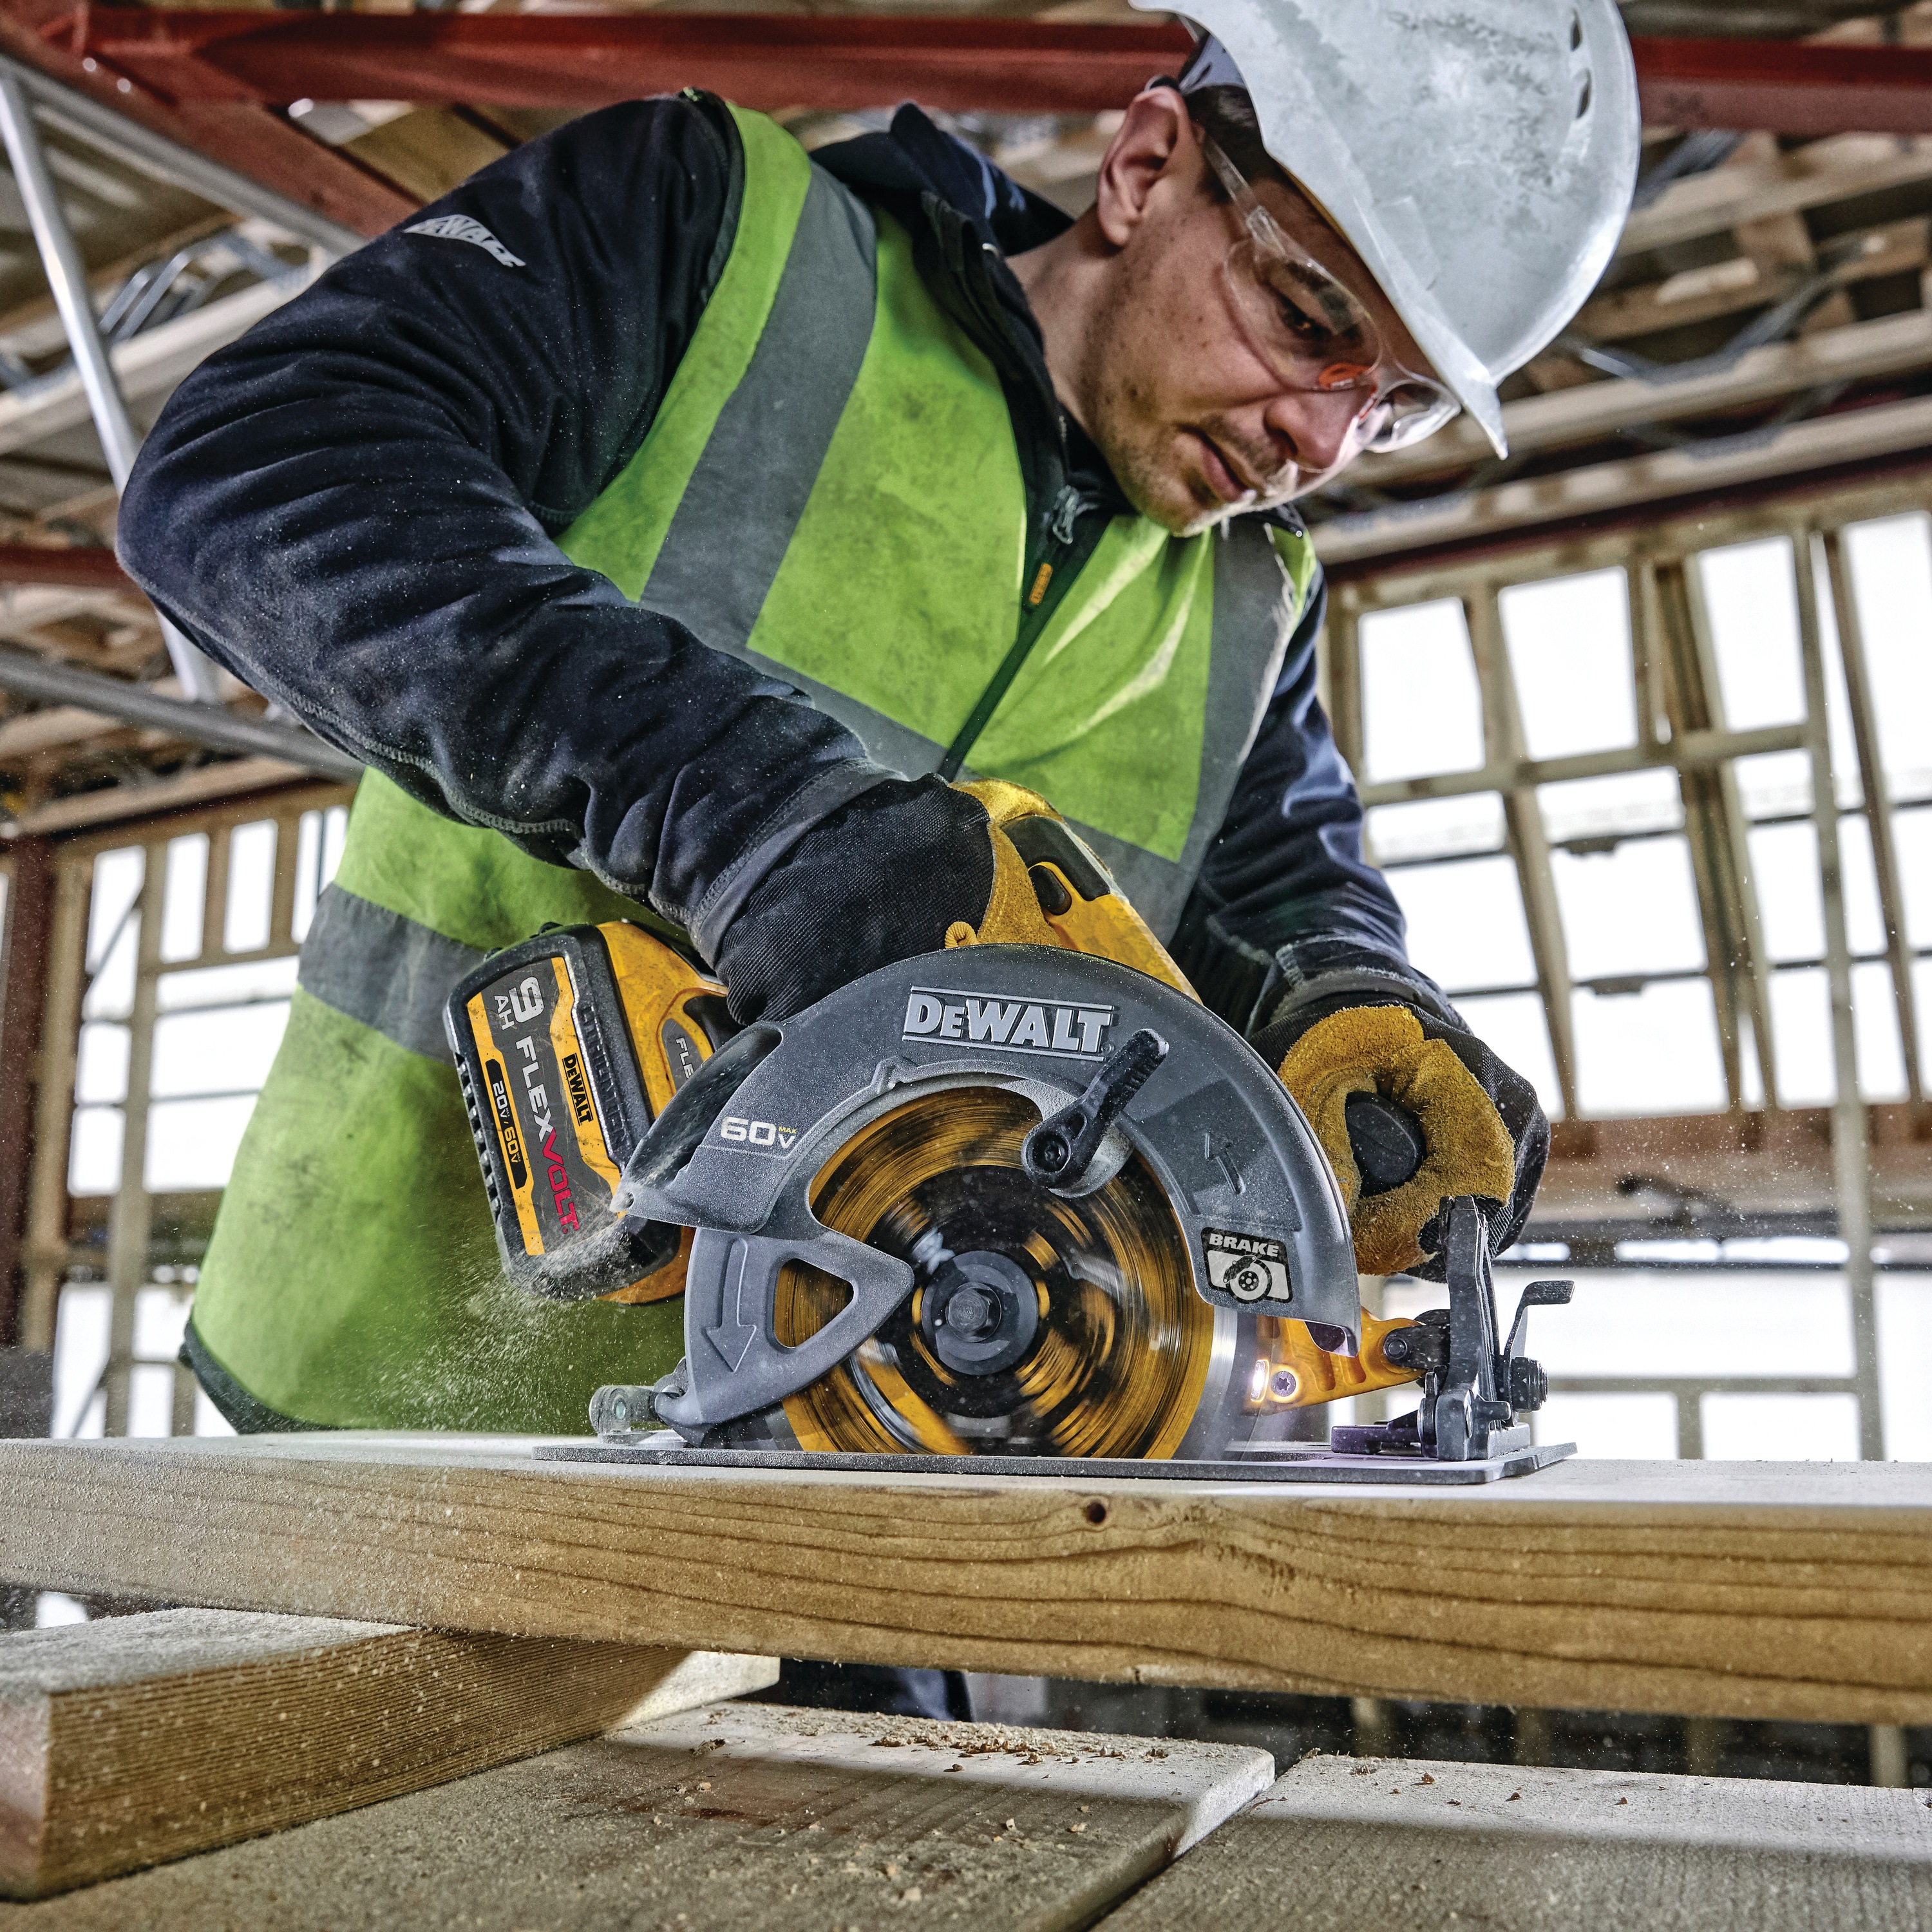 FLEXVOLT brushless cordless circular saw with brake kit being used by person on wood.